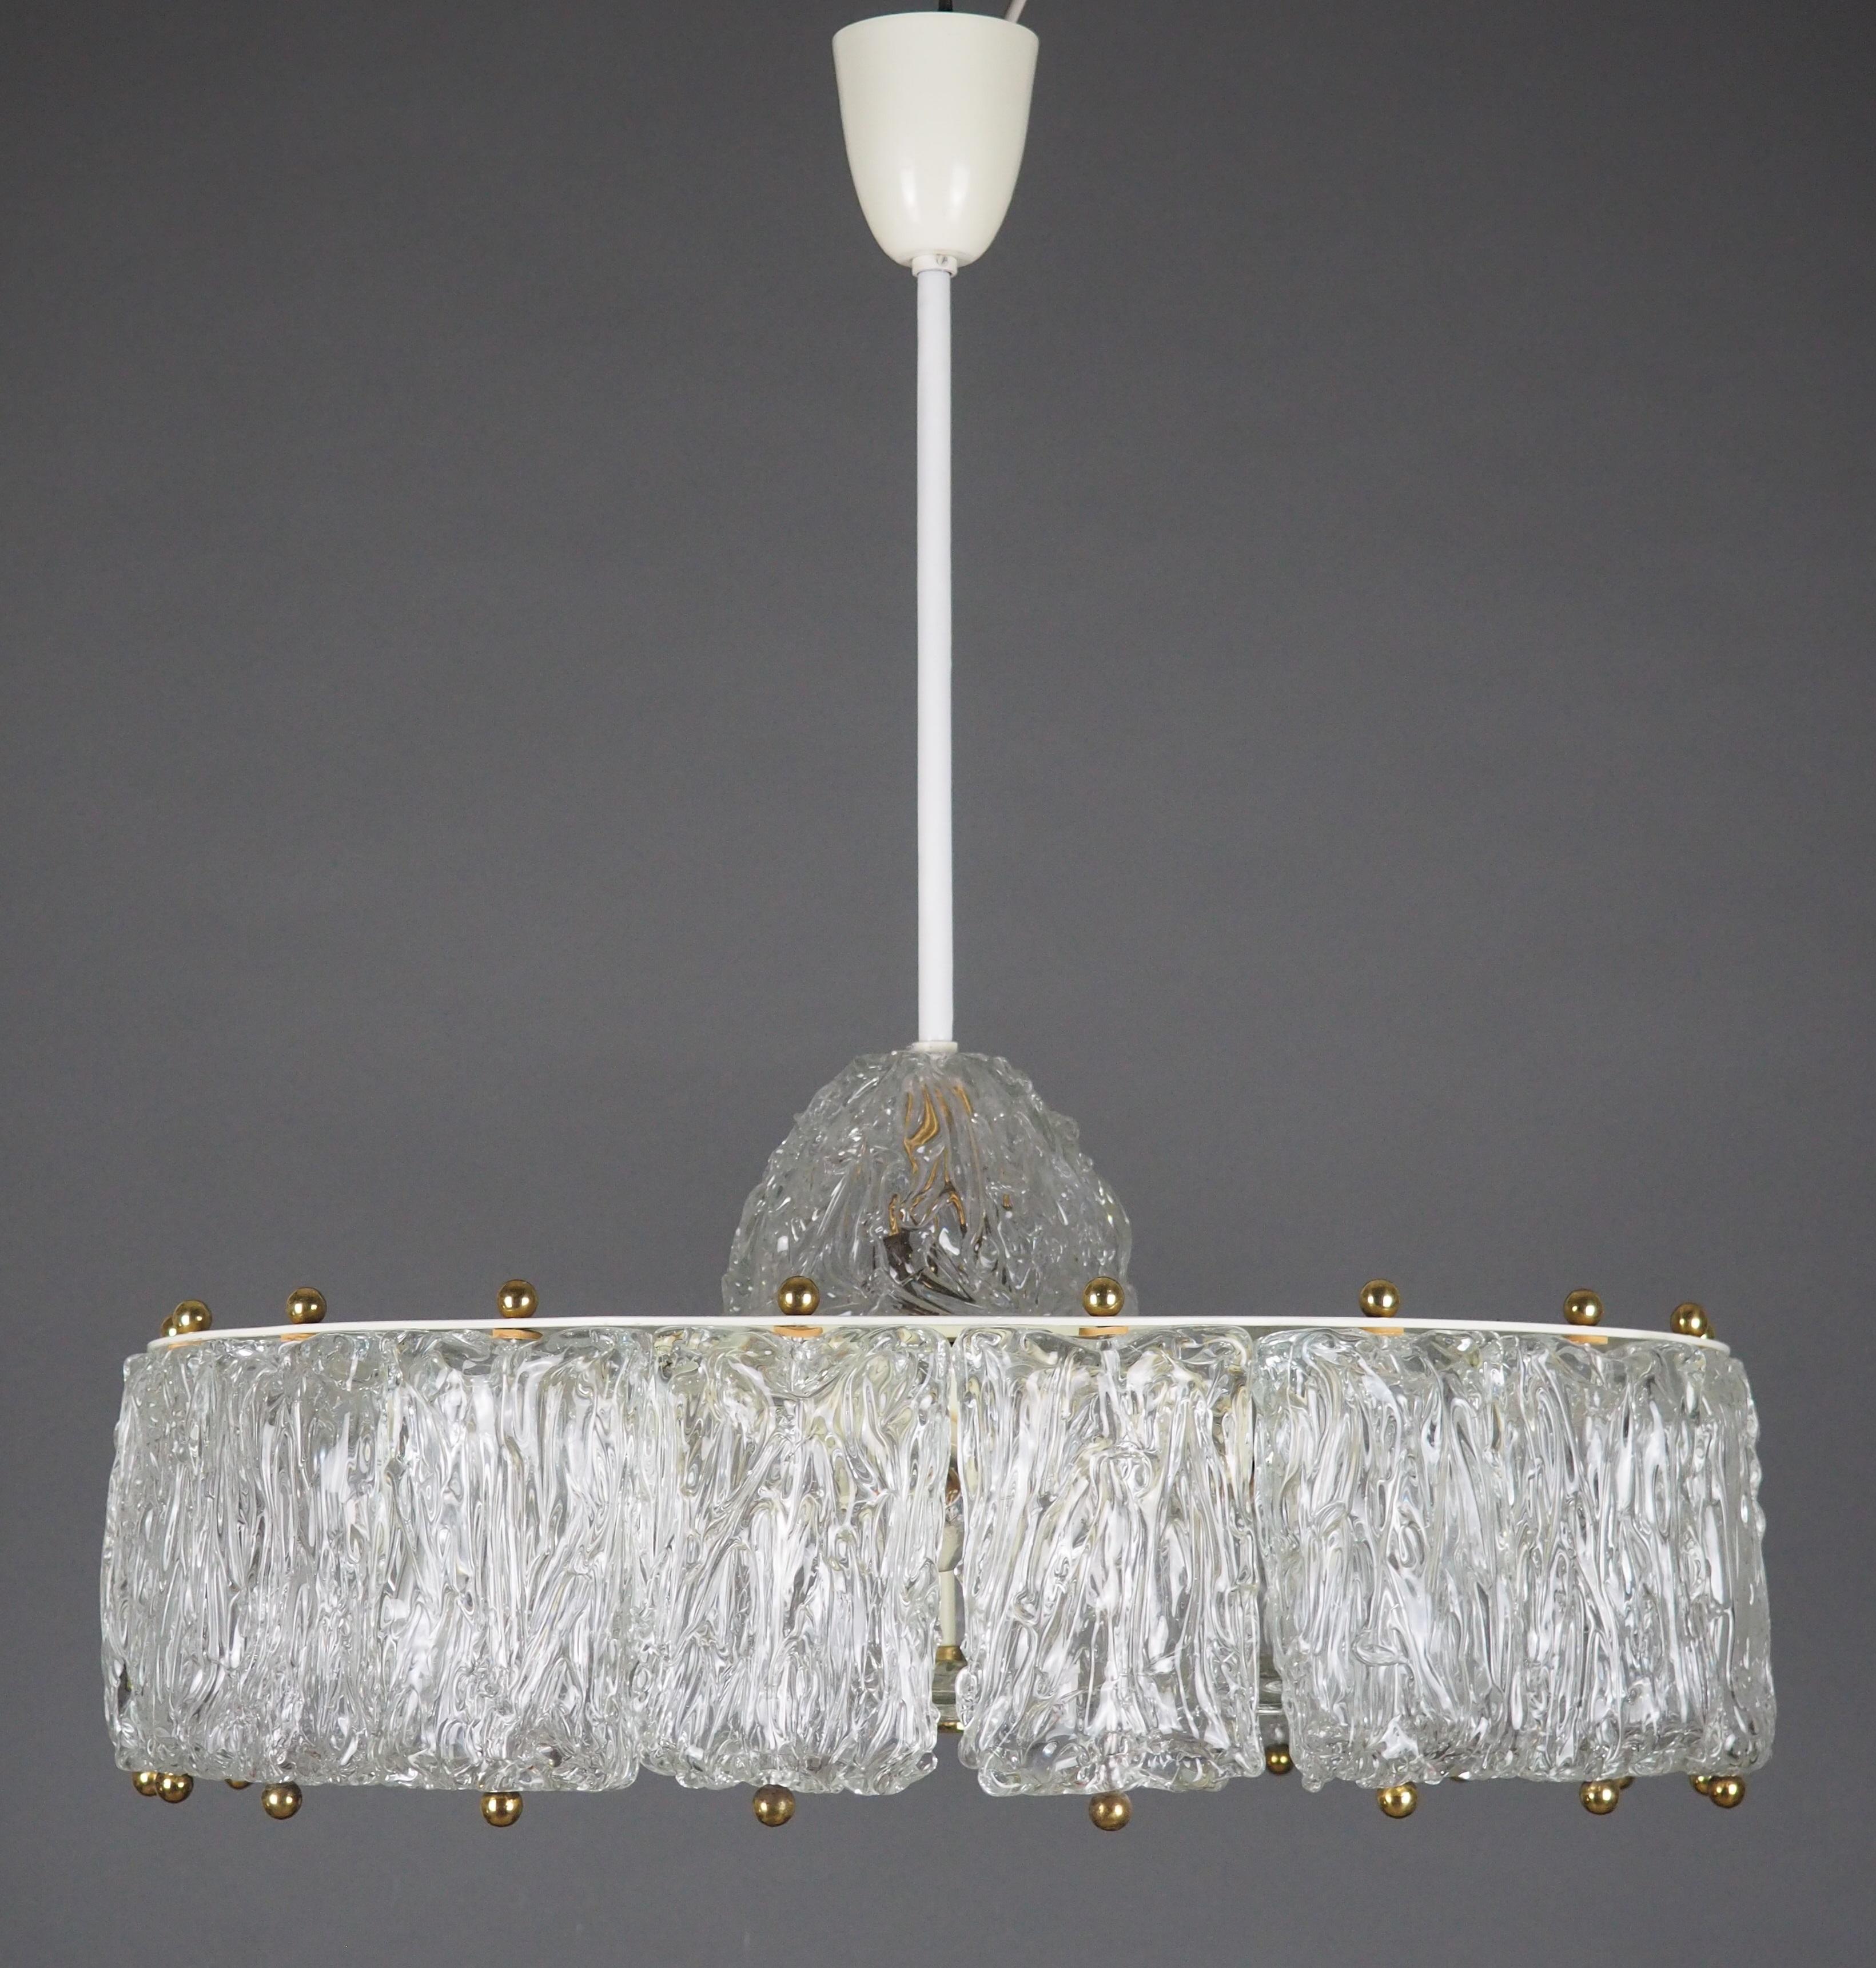 Italian Large Glass Drum Chandelier by Aureliano Toso, circa 1960s For Sale